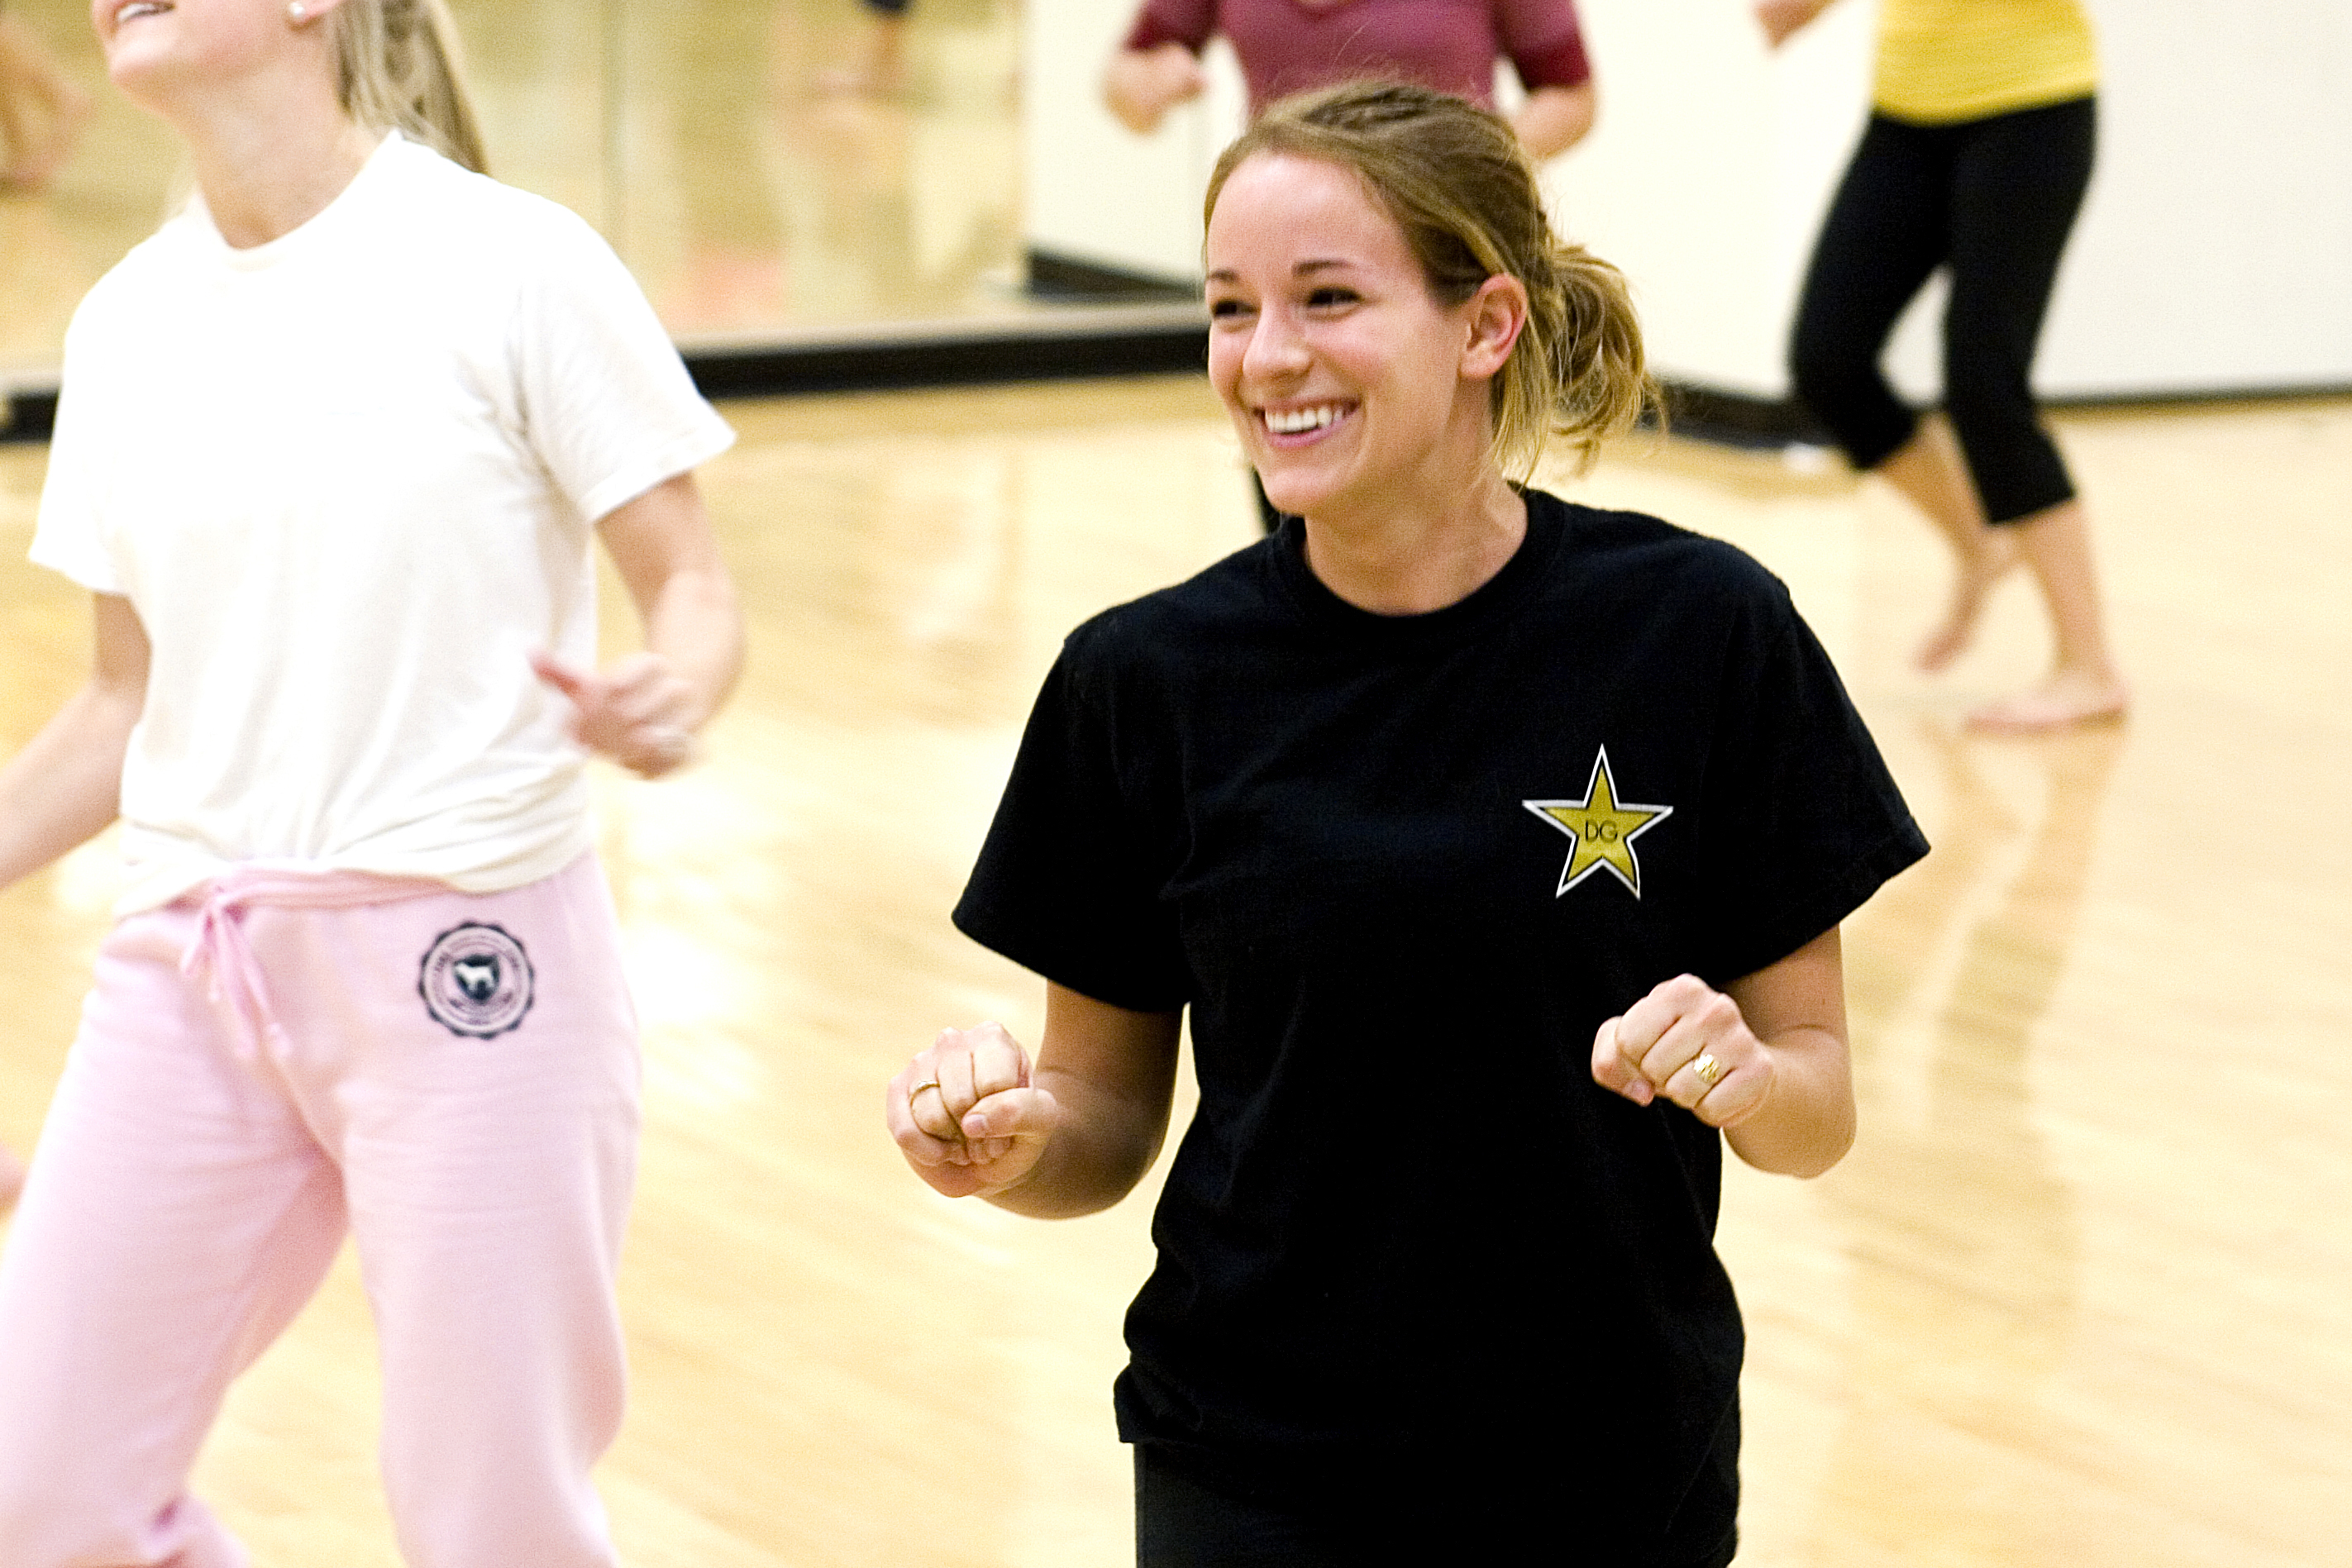 Students dancing during a fitness class